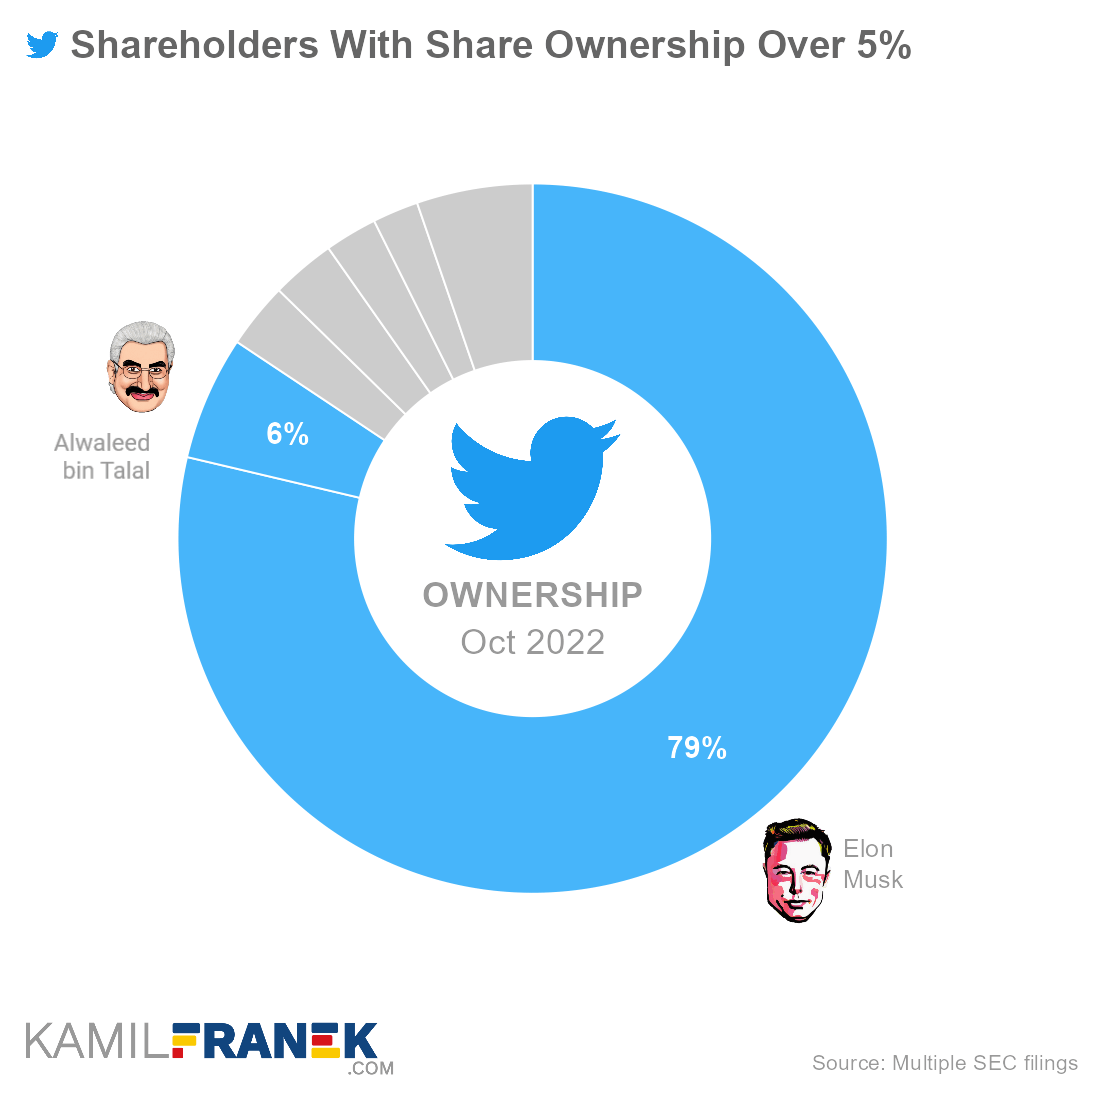 Twitter largest shareholders by share ownership and vote control (donut chart)